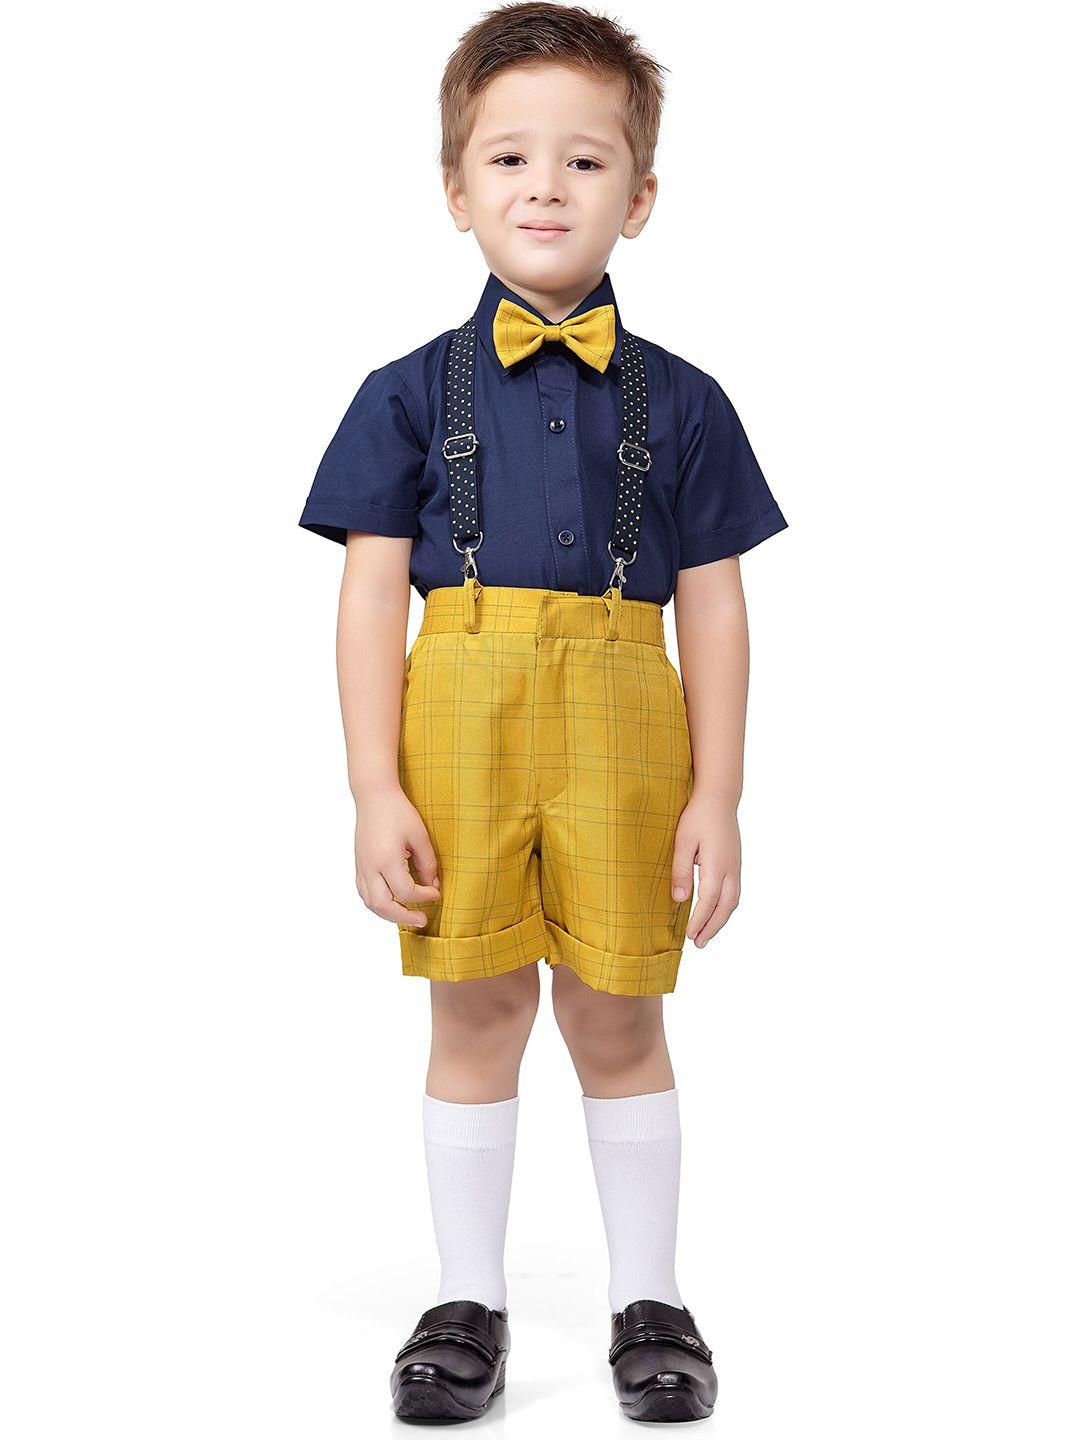 jeetethnics boys yellow & blue shirt with shorts with bow tie